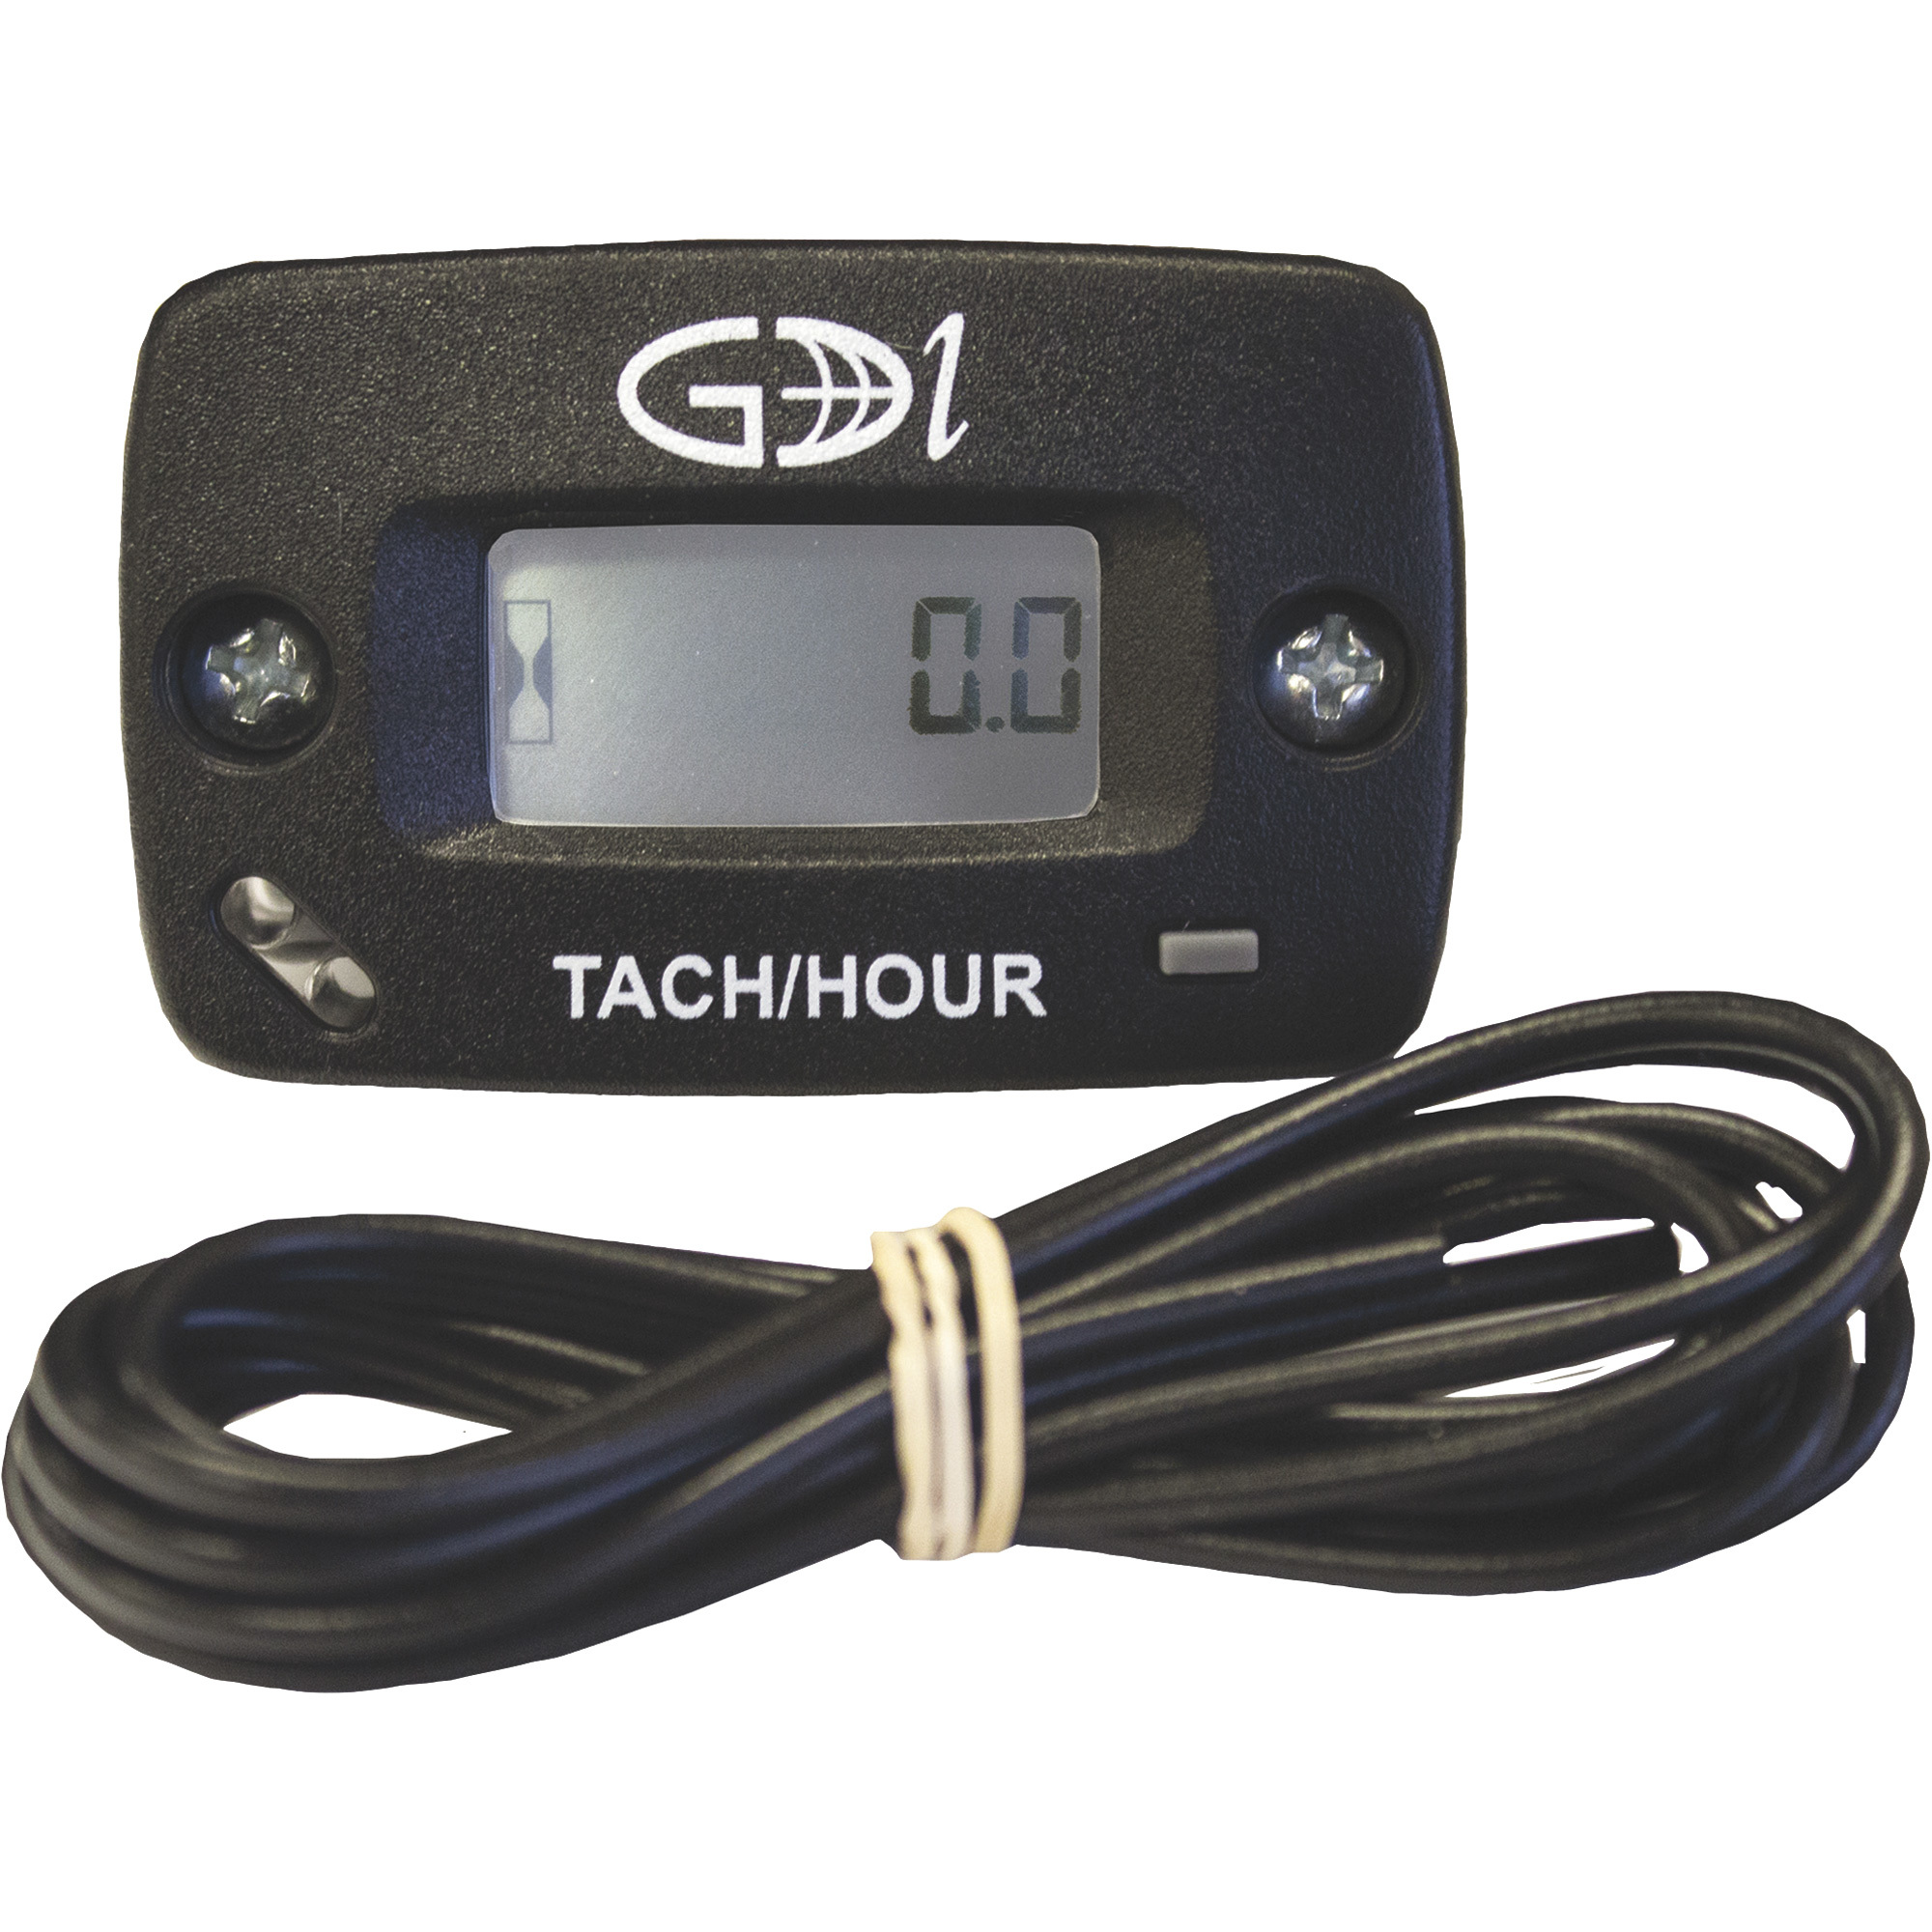 GDI Surface-Mount Hour Meter with Tachometer, Model N111-0100-1005